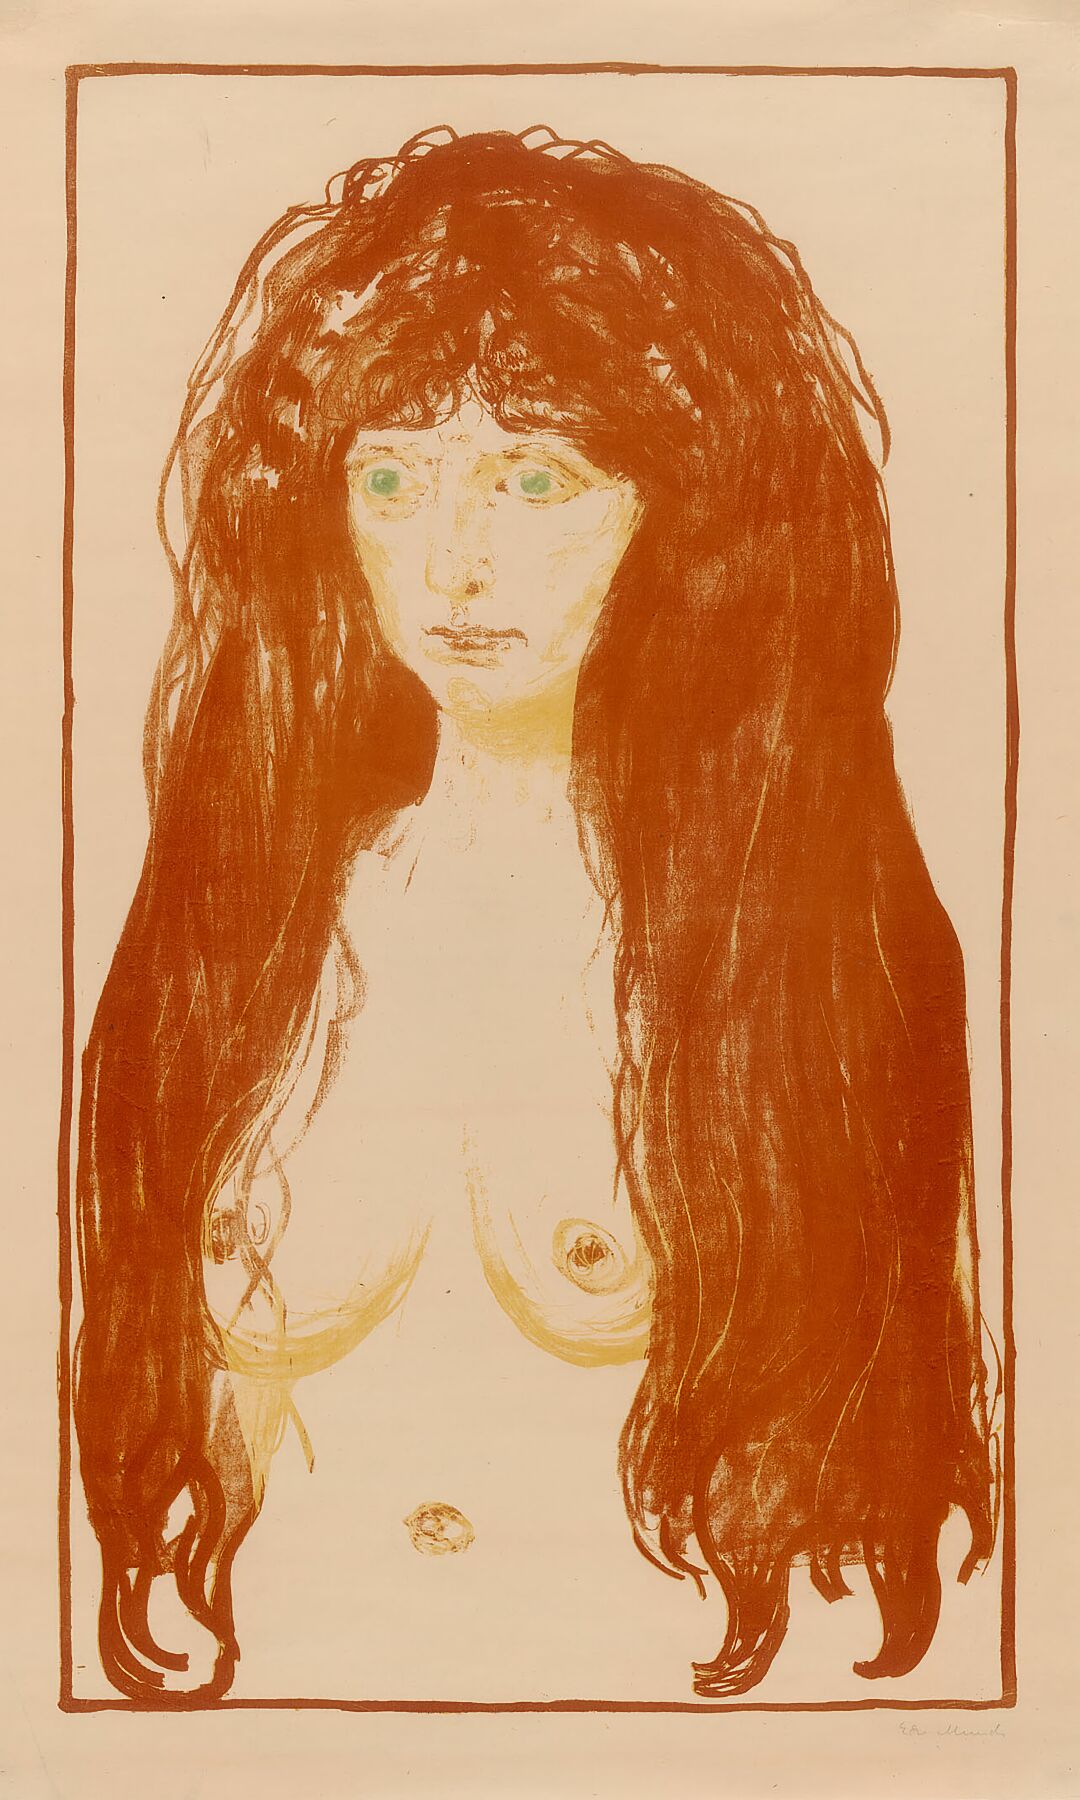 Woman with Red Hair and Green Eyes. The SinDate- 1902  Artist- Edvard Munch